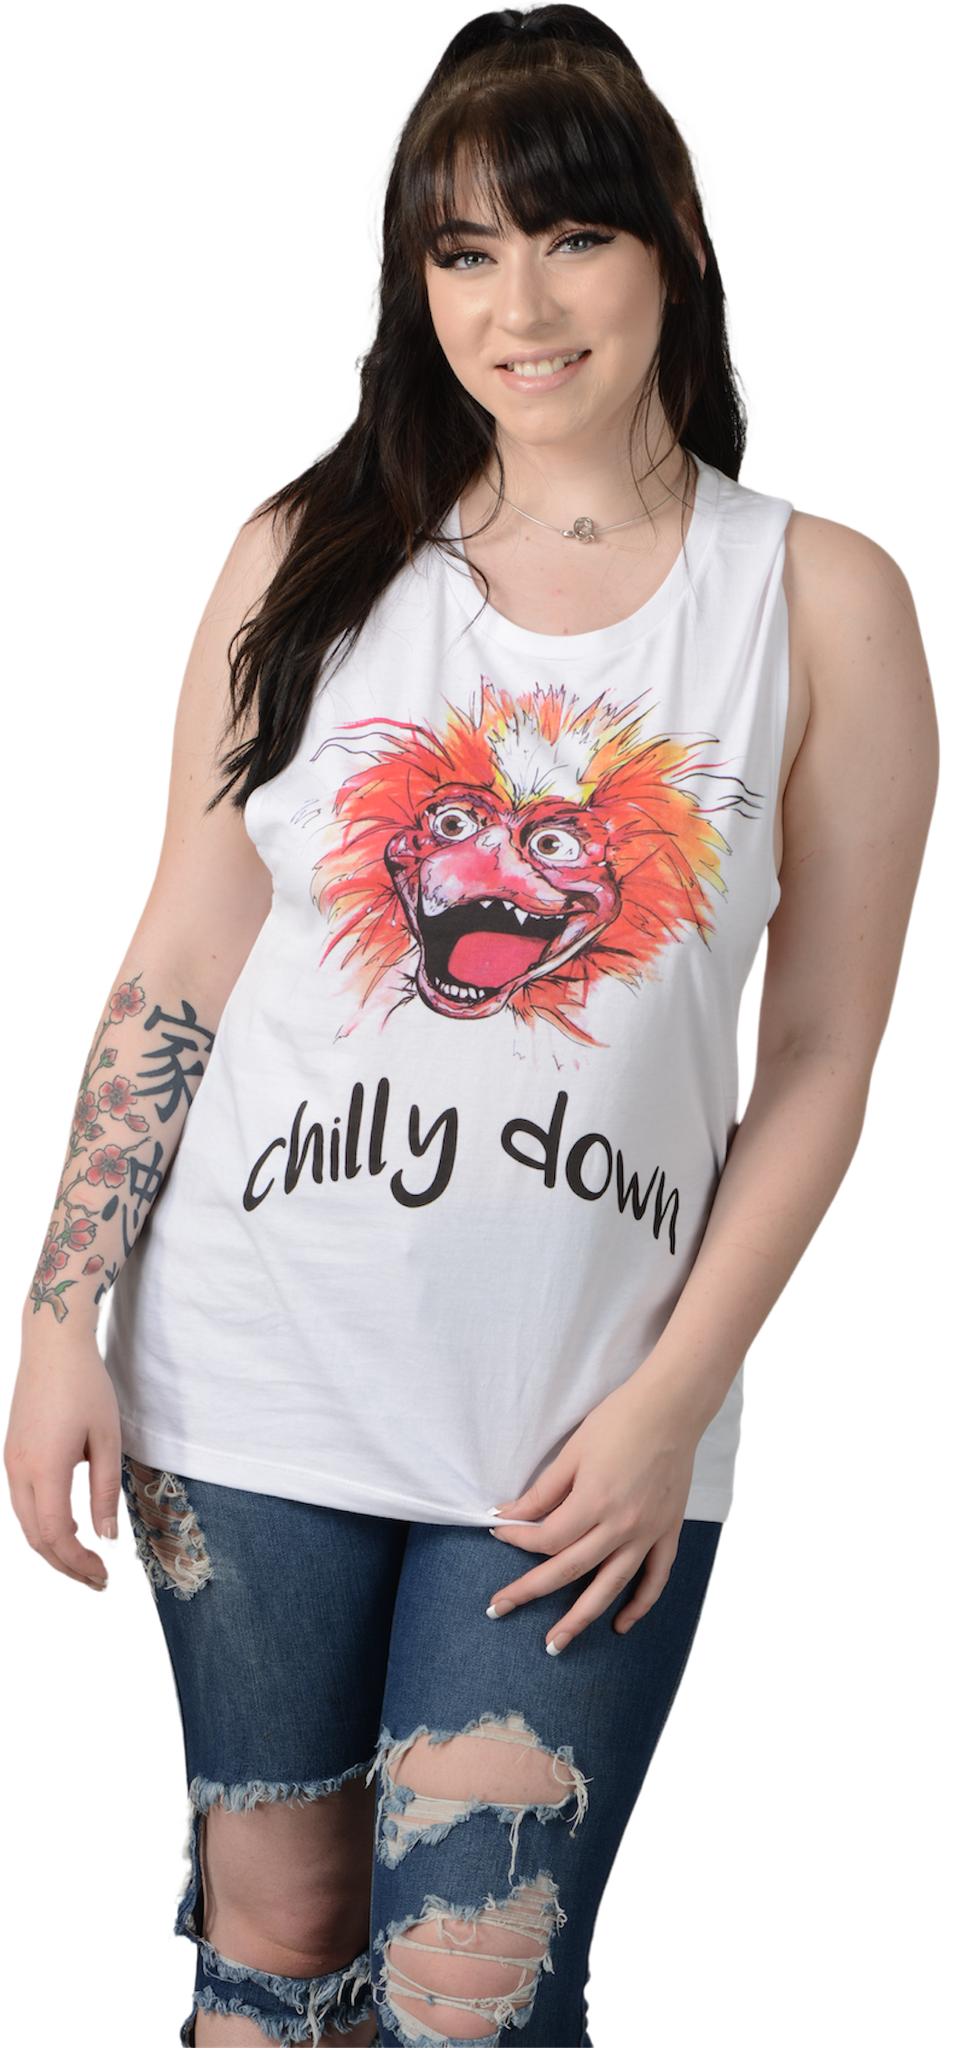 LABYRINTH "CHILLY DOWN" TANK TOP